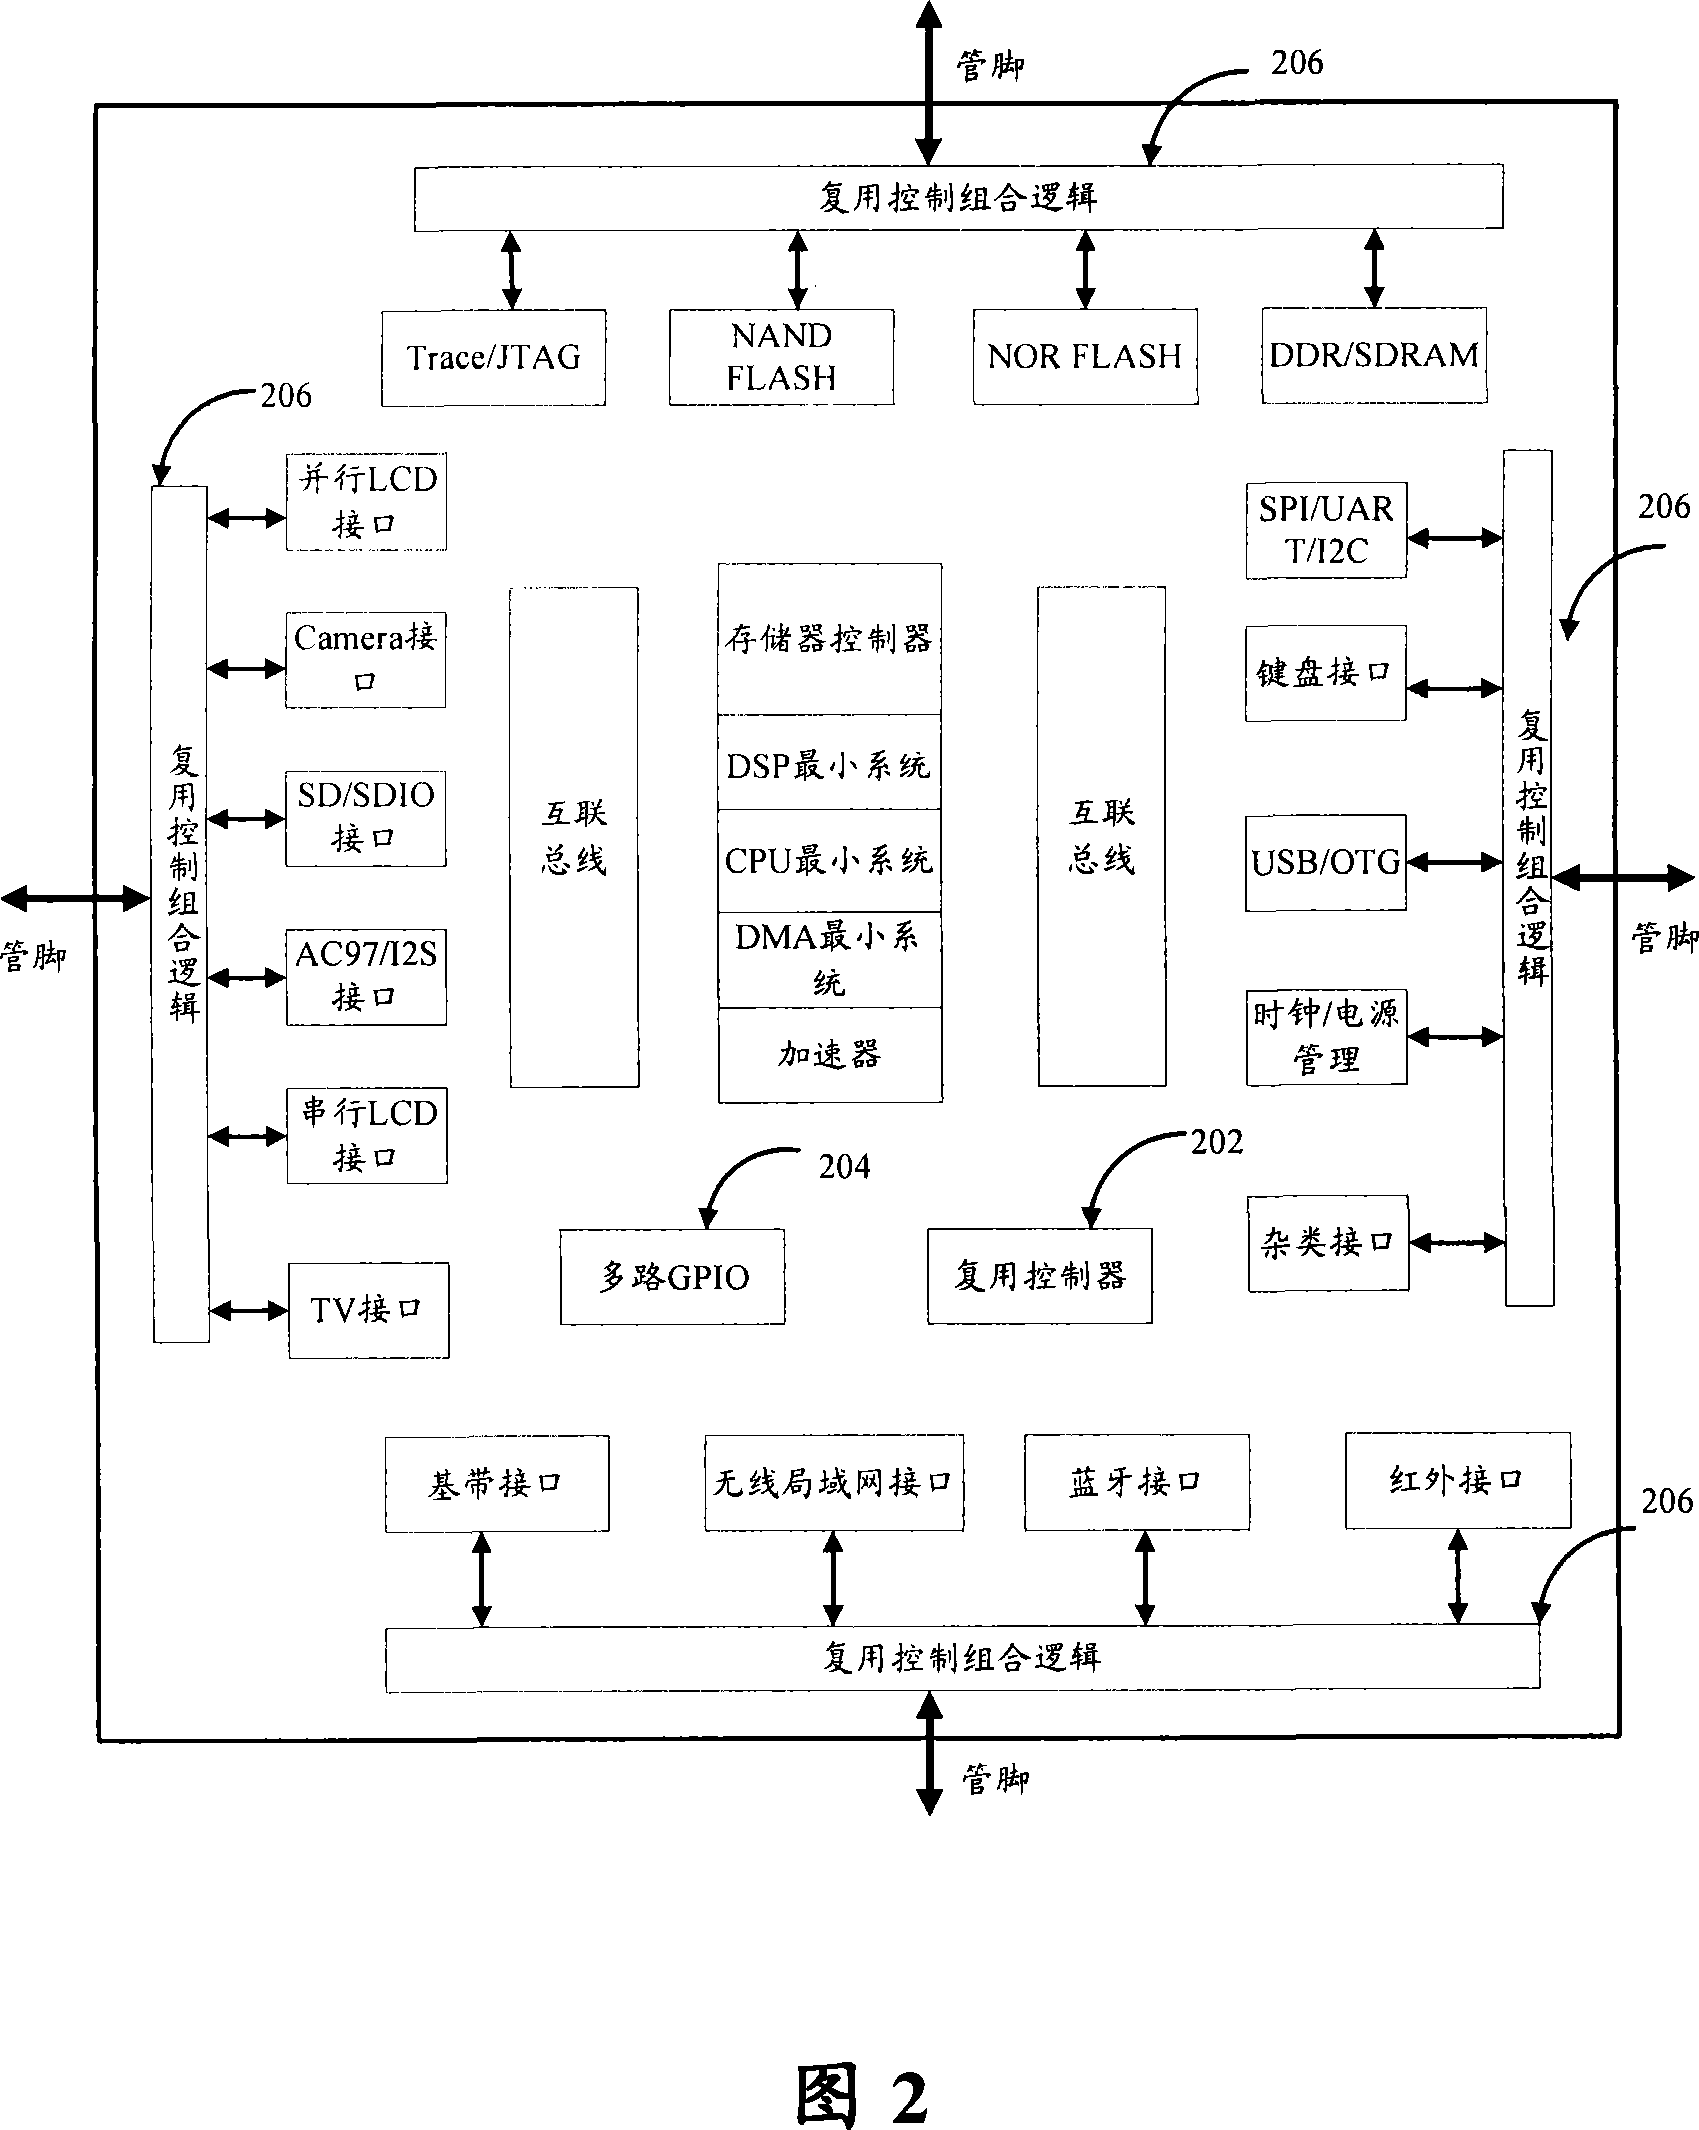 Terminal chip pin multiplexing device